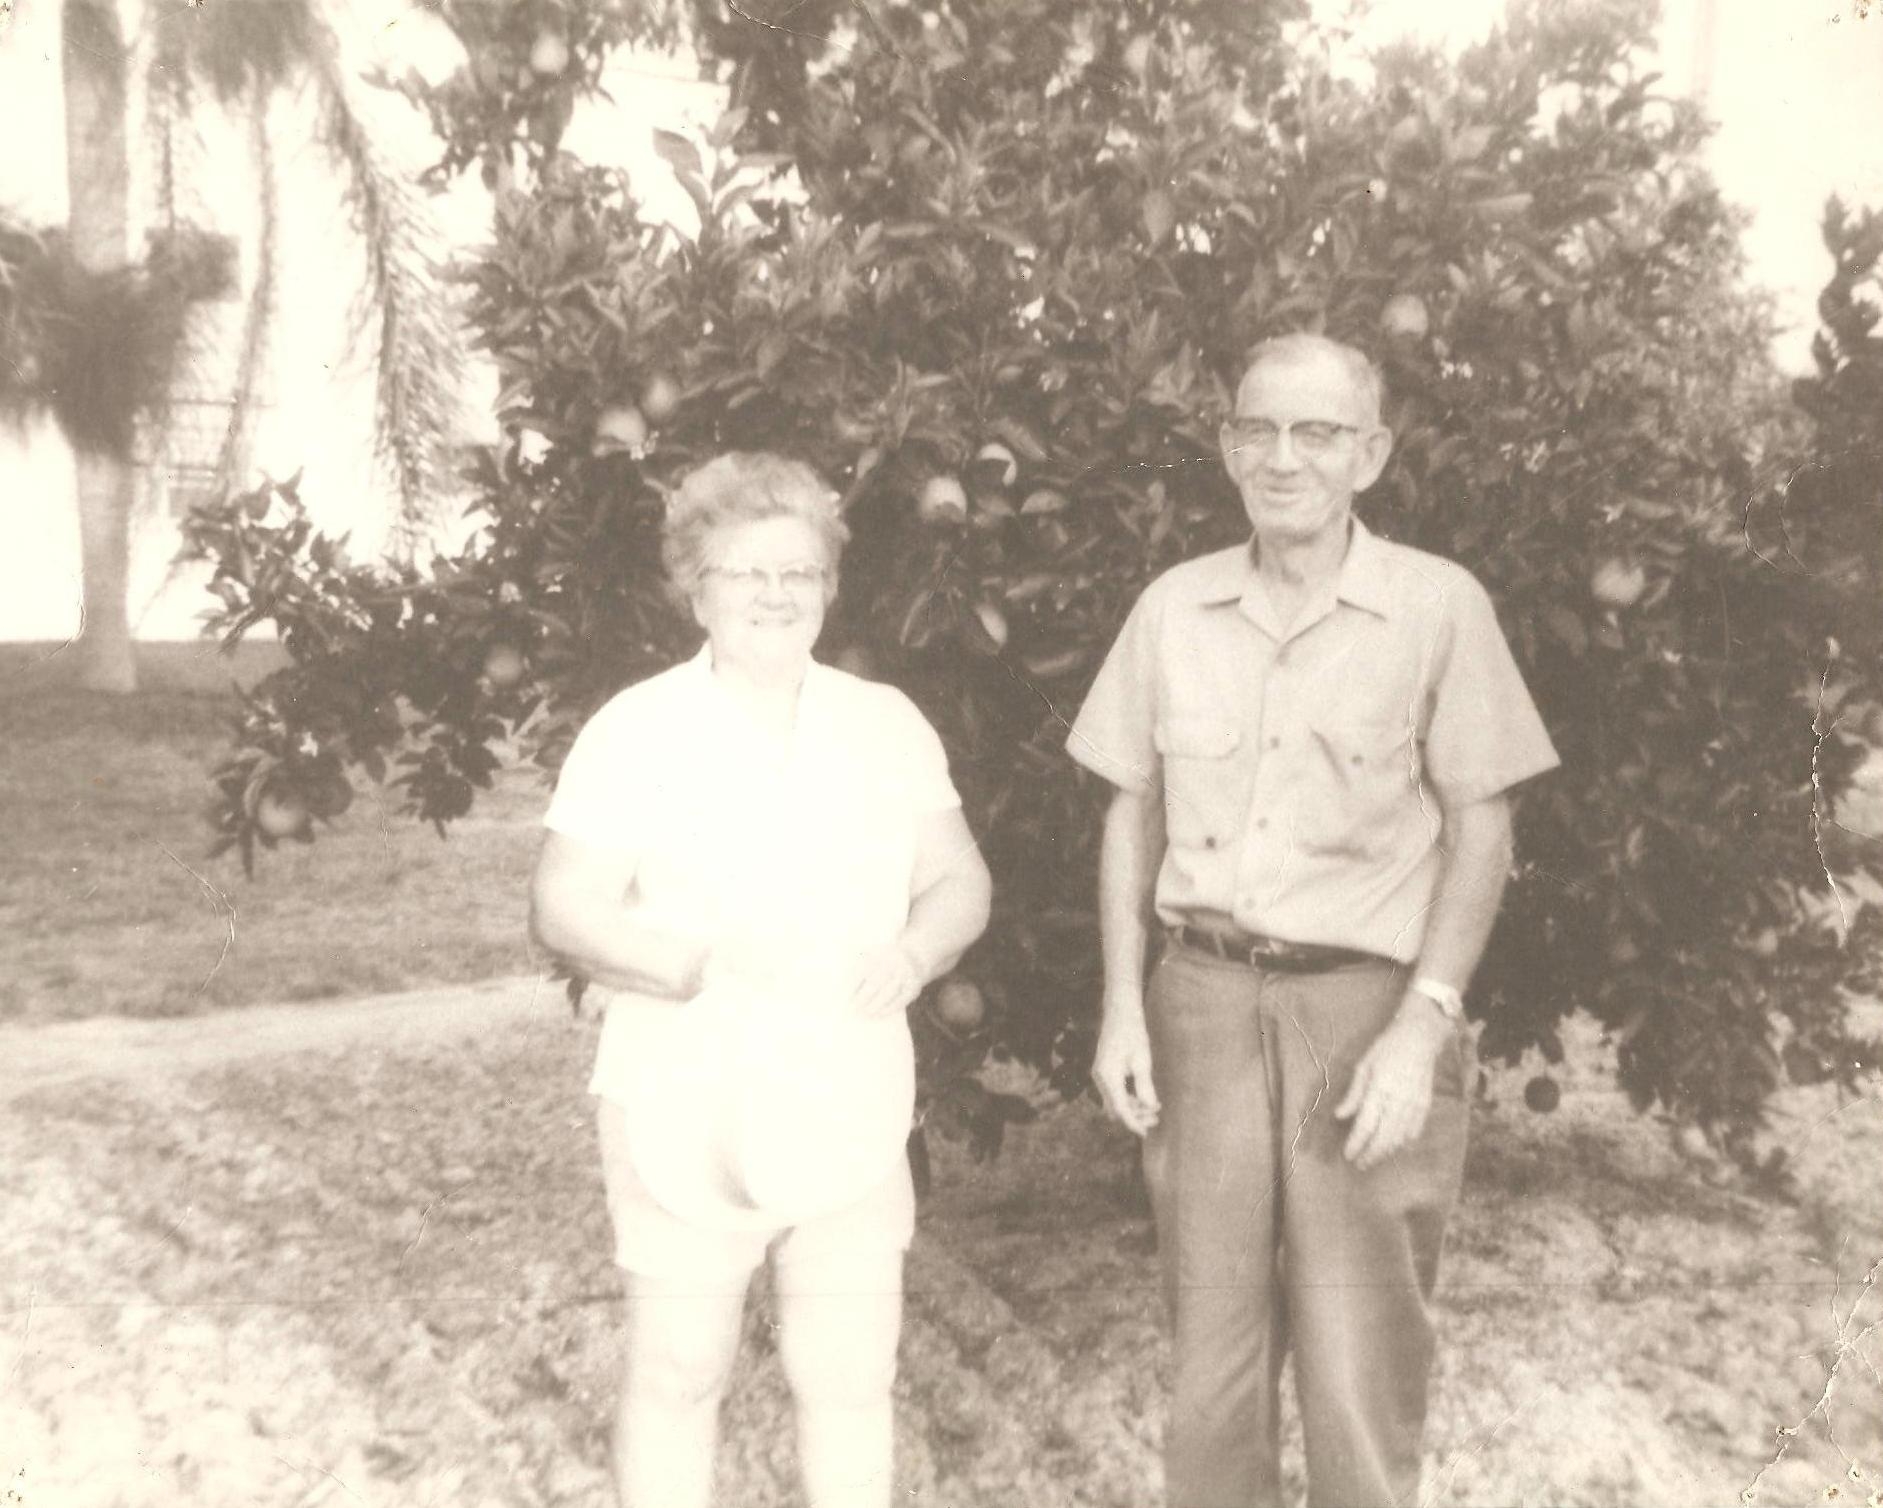 Phillip & Oma (Rogers) Moseley, Florida